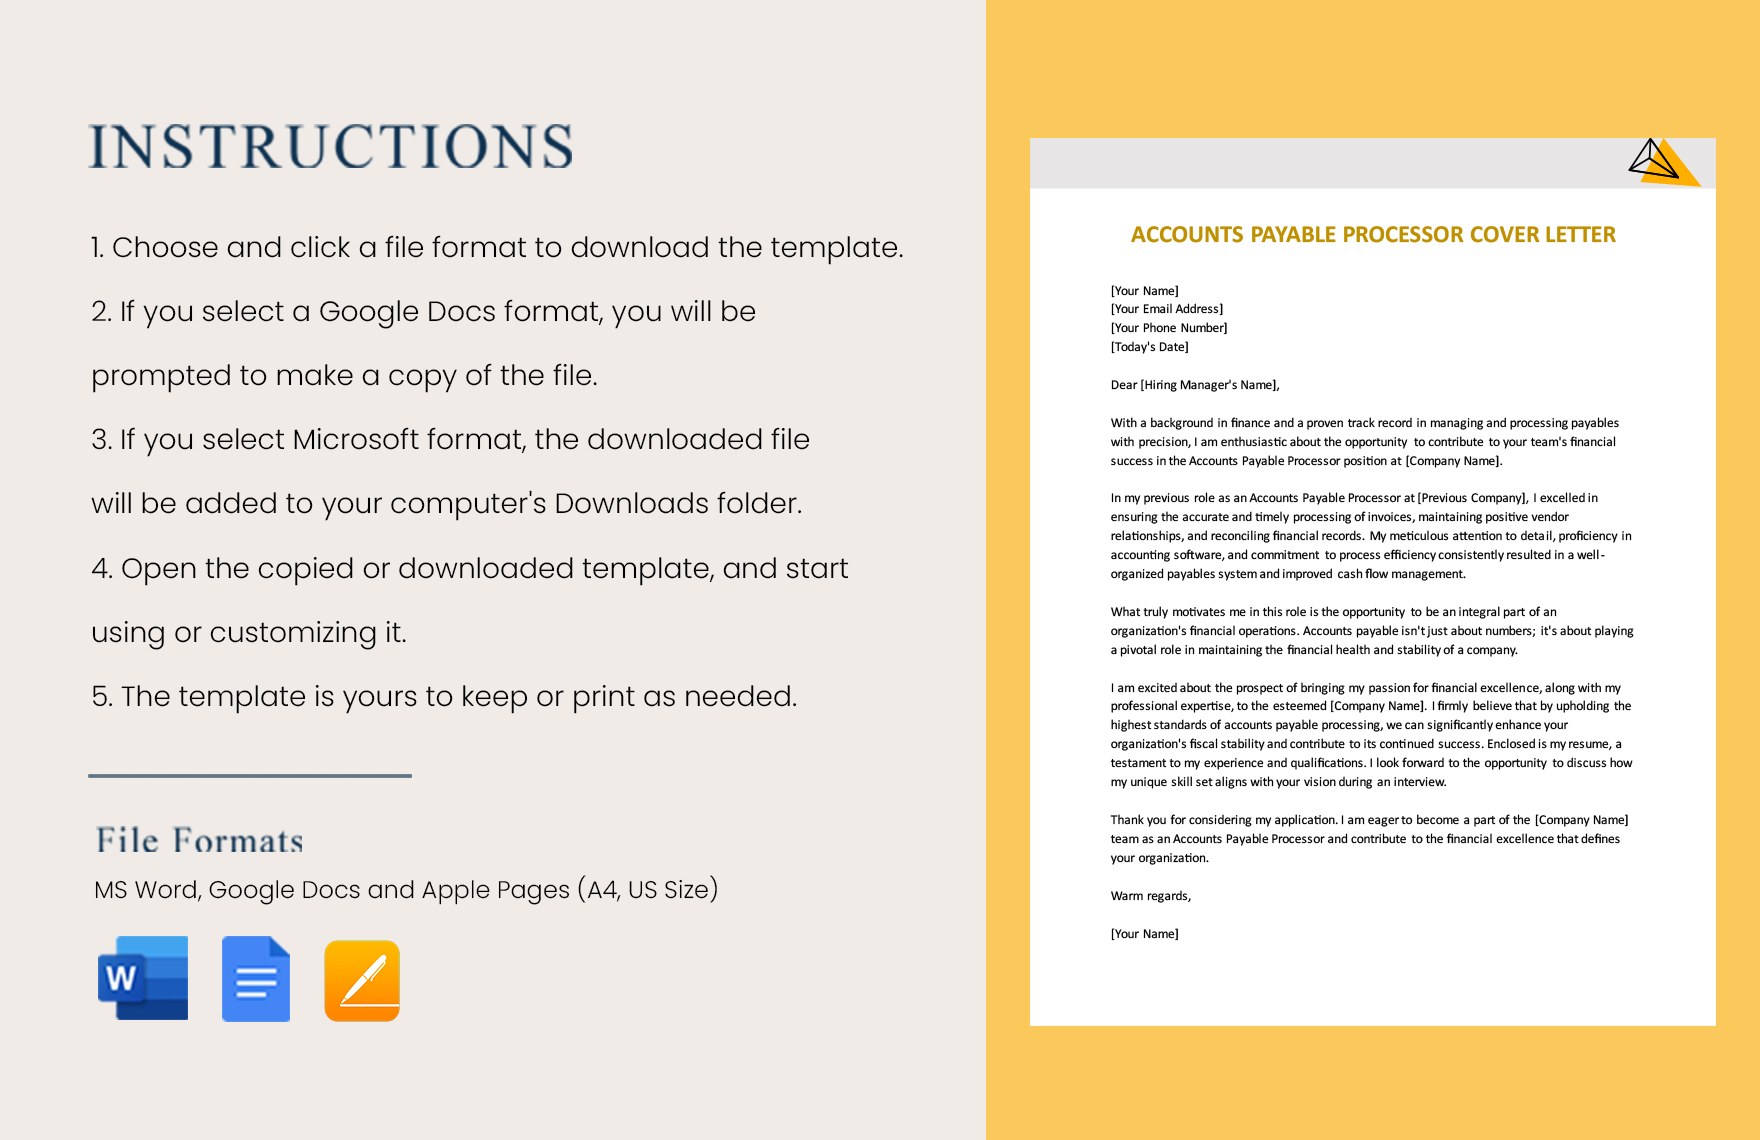 Accounts Payable Processor Cover Letter